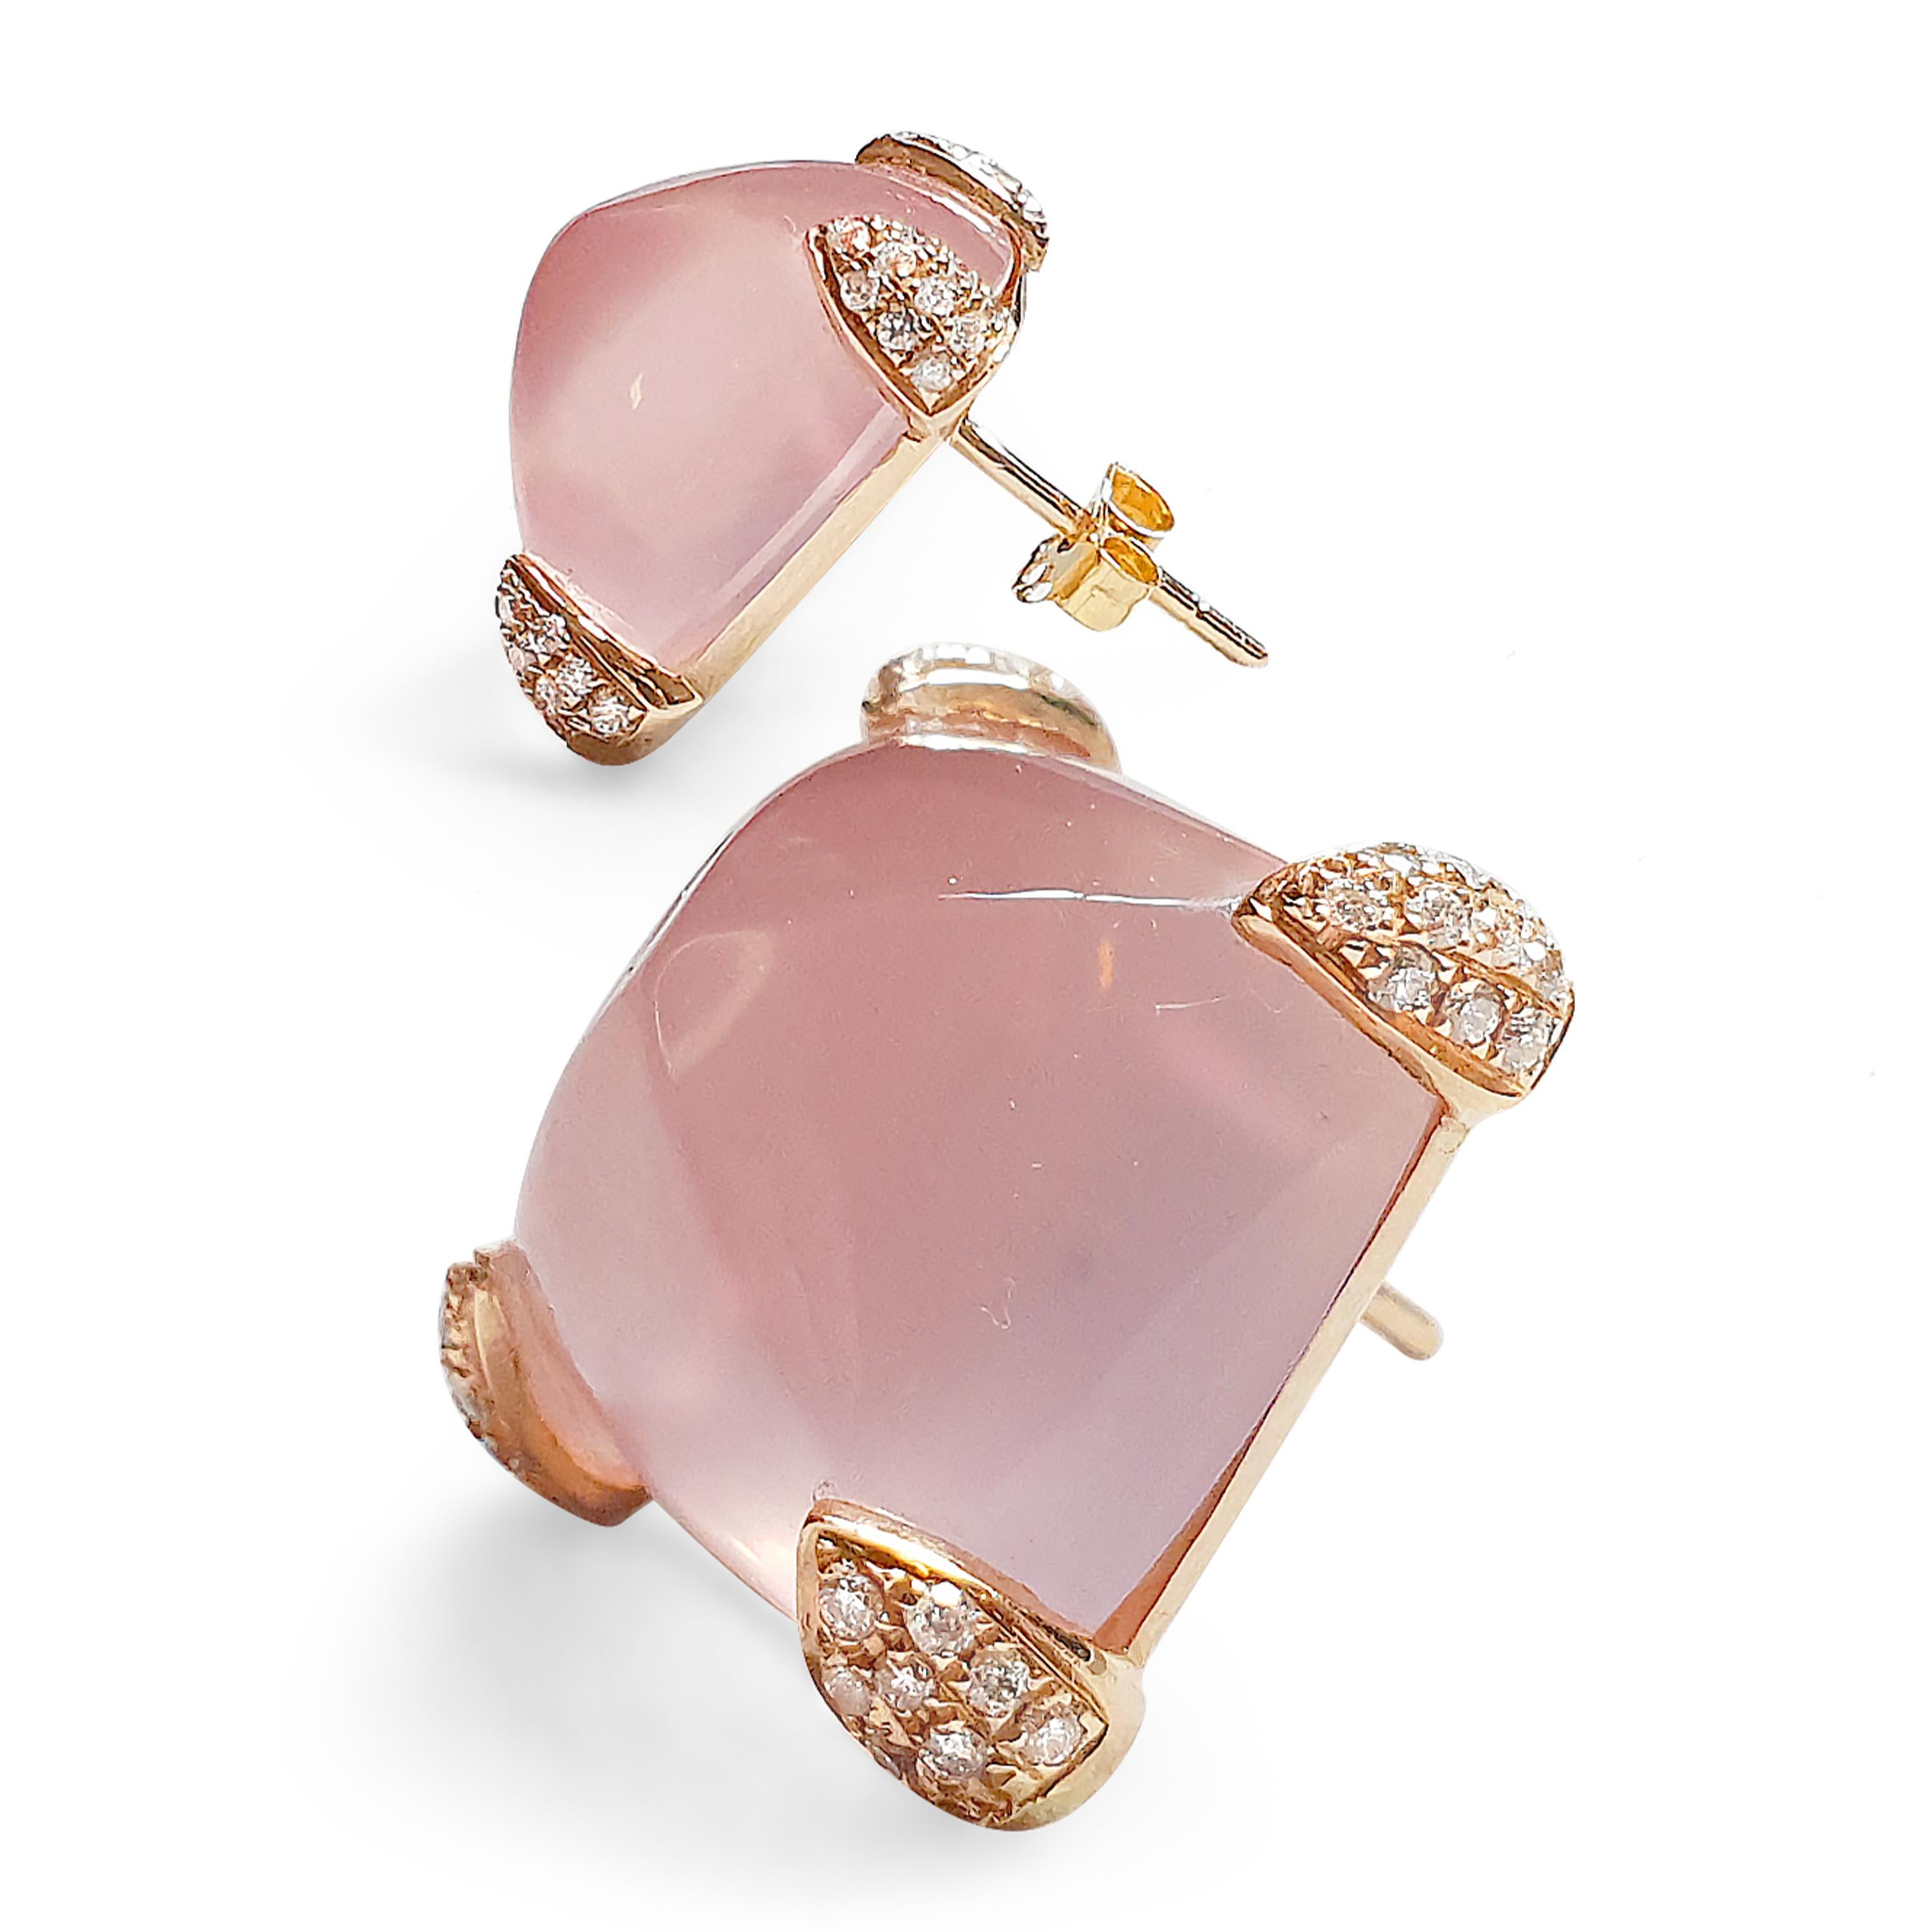 Description:
One-off asymmetric sugarloaf cabochon rose quartz earrings with diamond-set claws, set in 18ct rose gold.

Inspiration:
Enhancing the natural beauty of the rose quartz cabochon with the delicate sparkles of the diamonds. These earrings